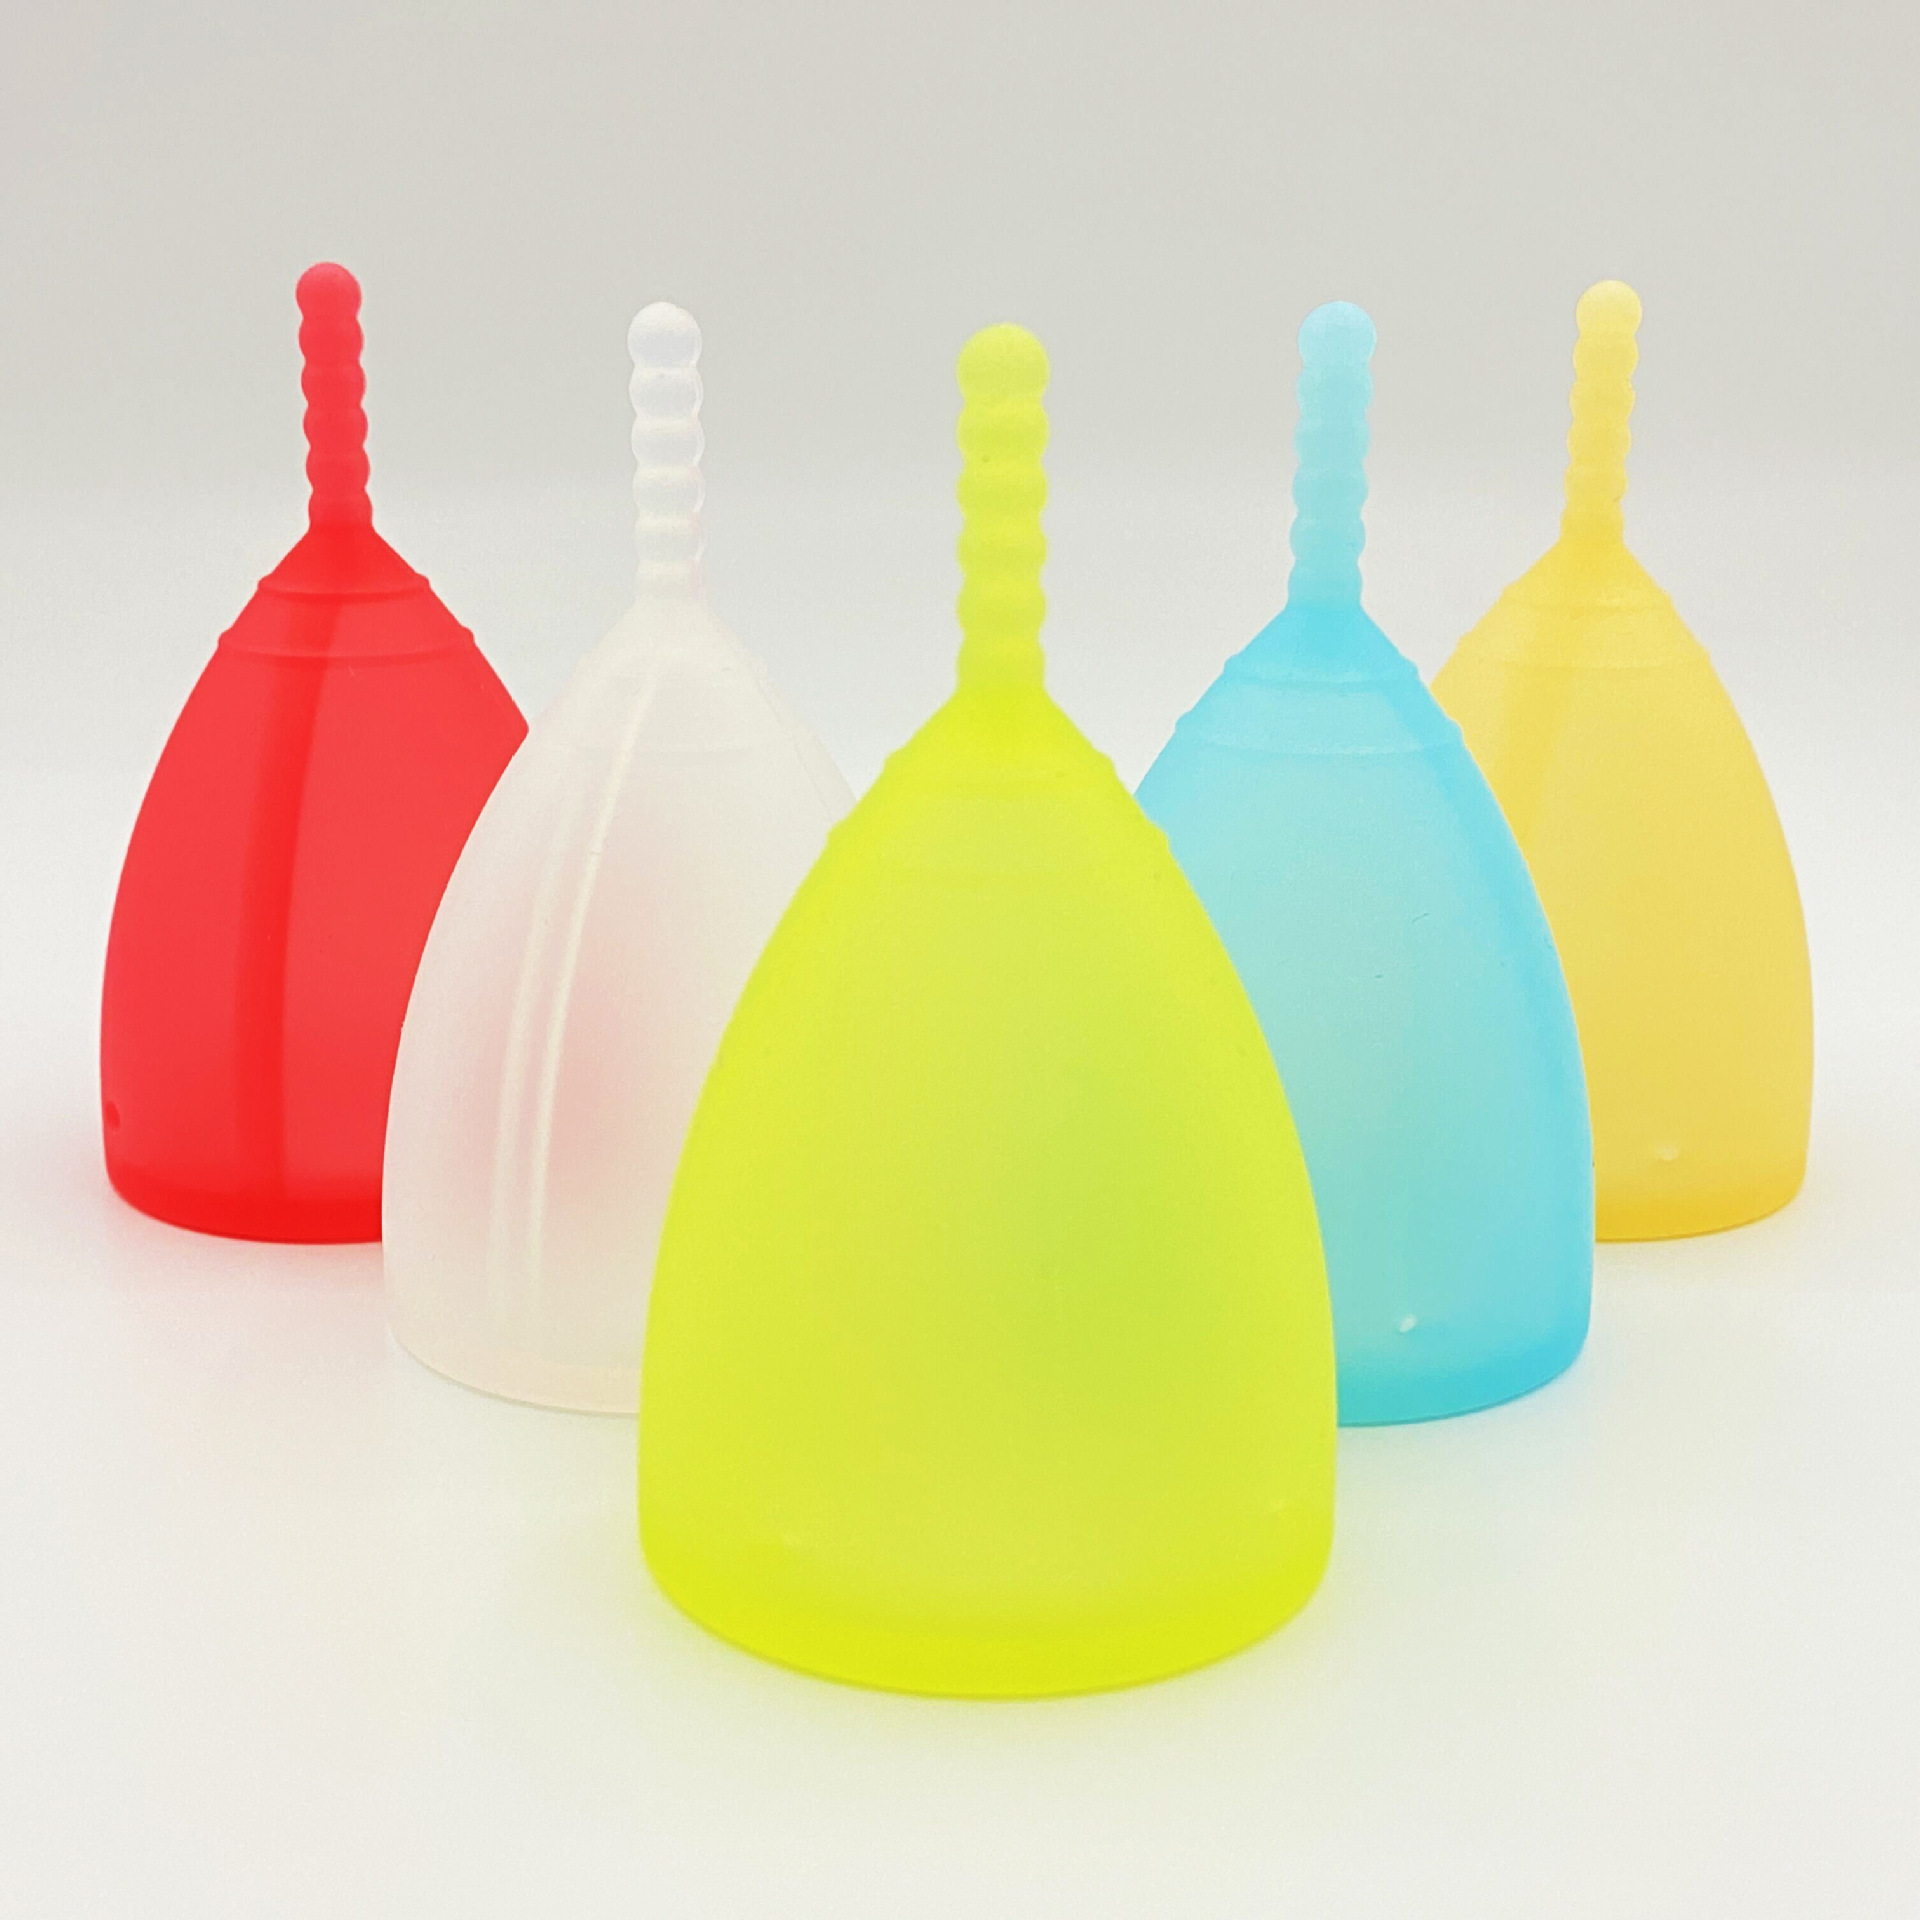 V-Care period menstrual cup company for ladies-1